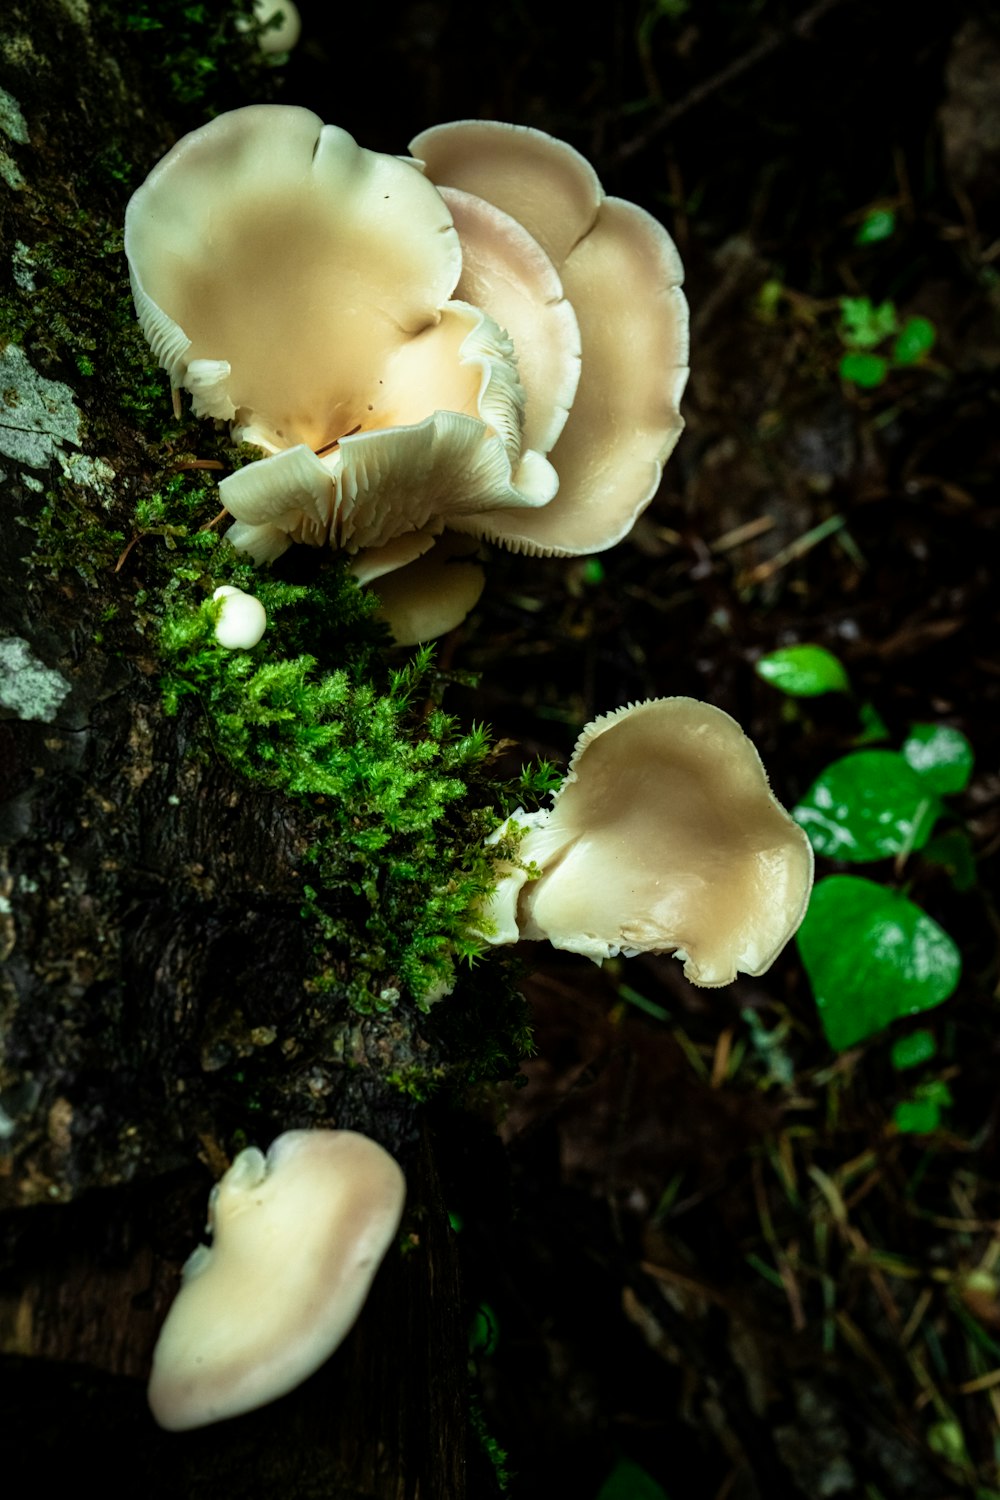 a group of mushrooms growing on a tree trunk